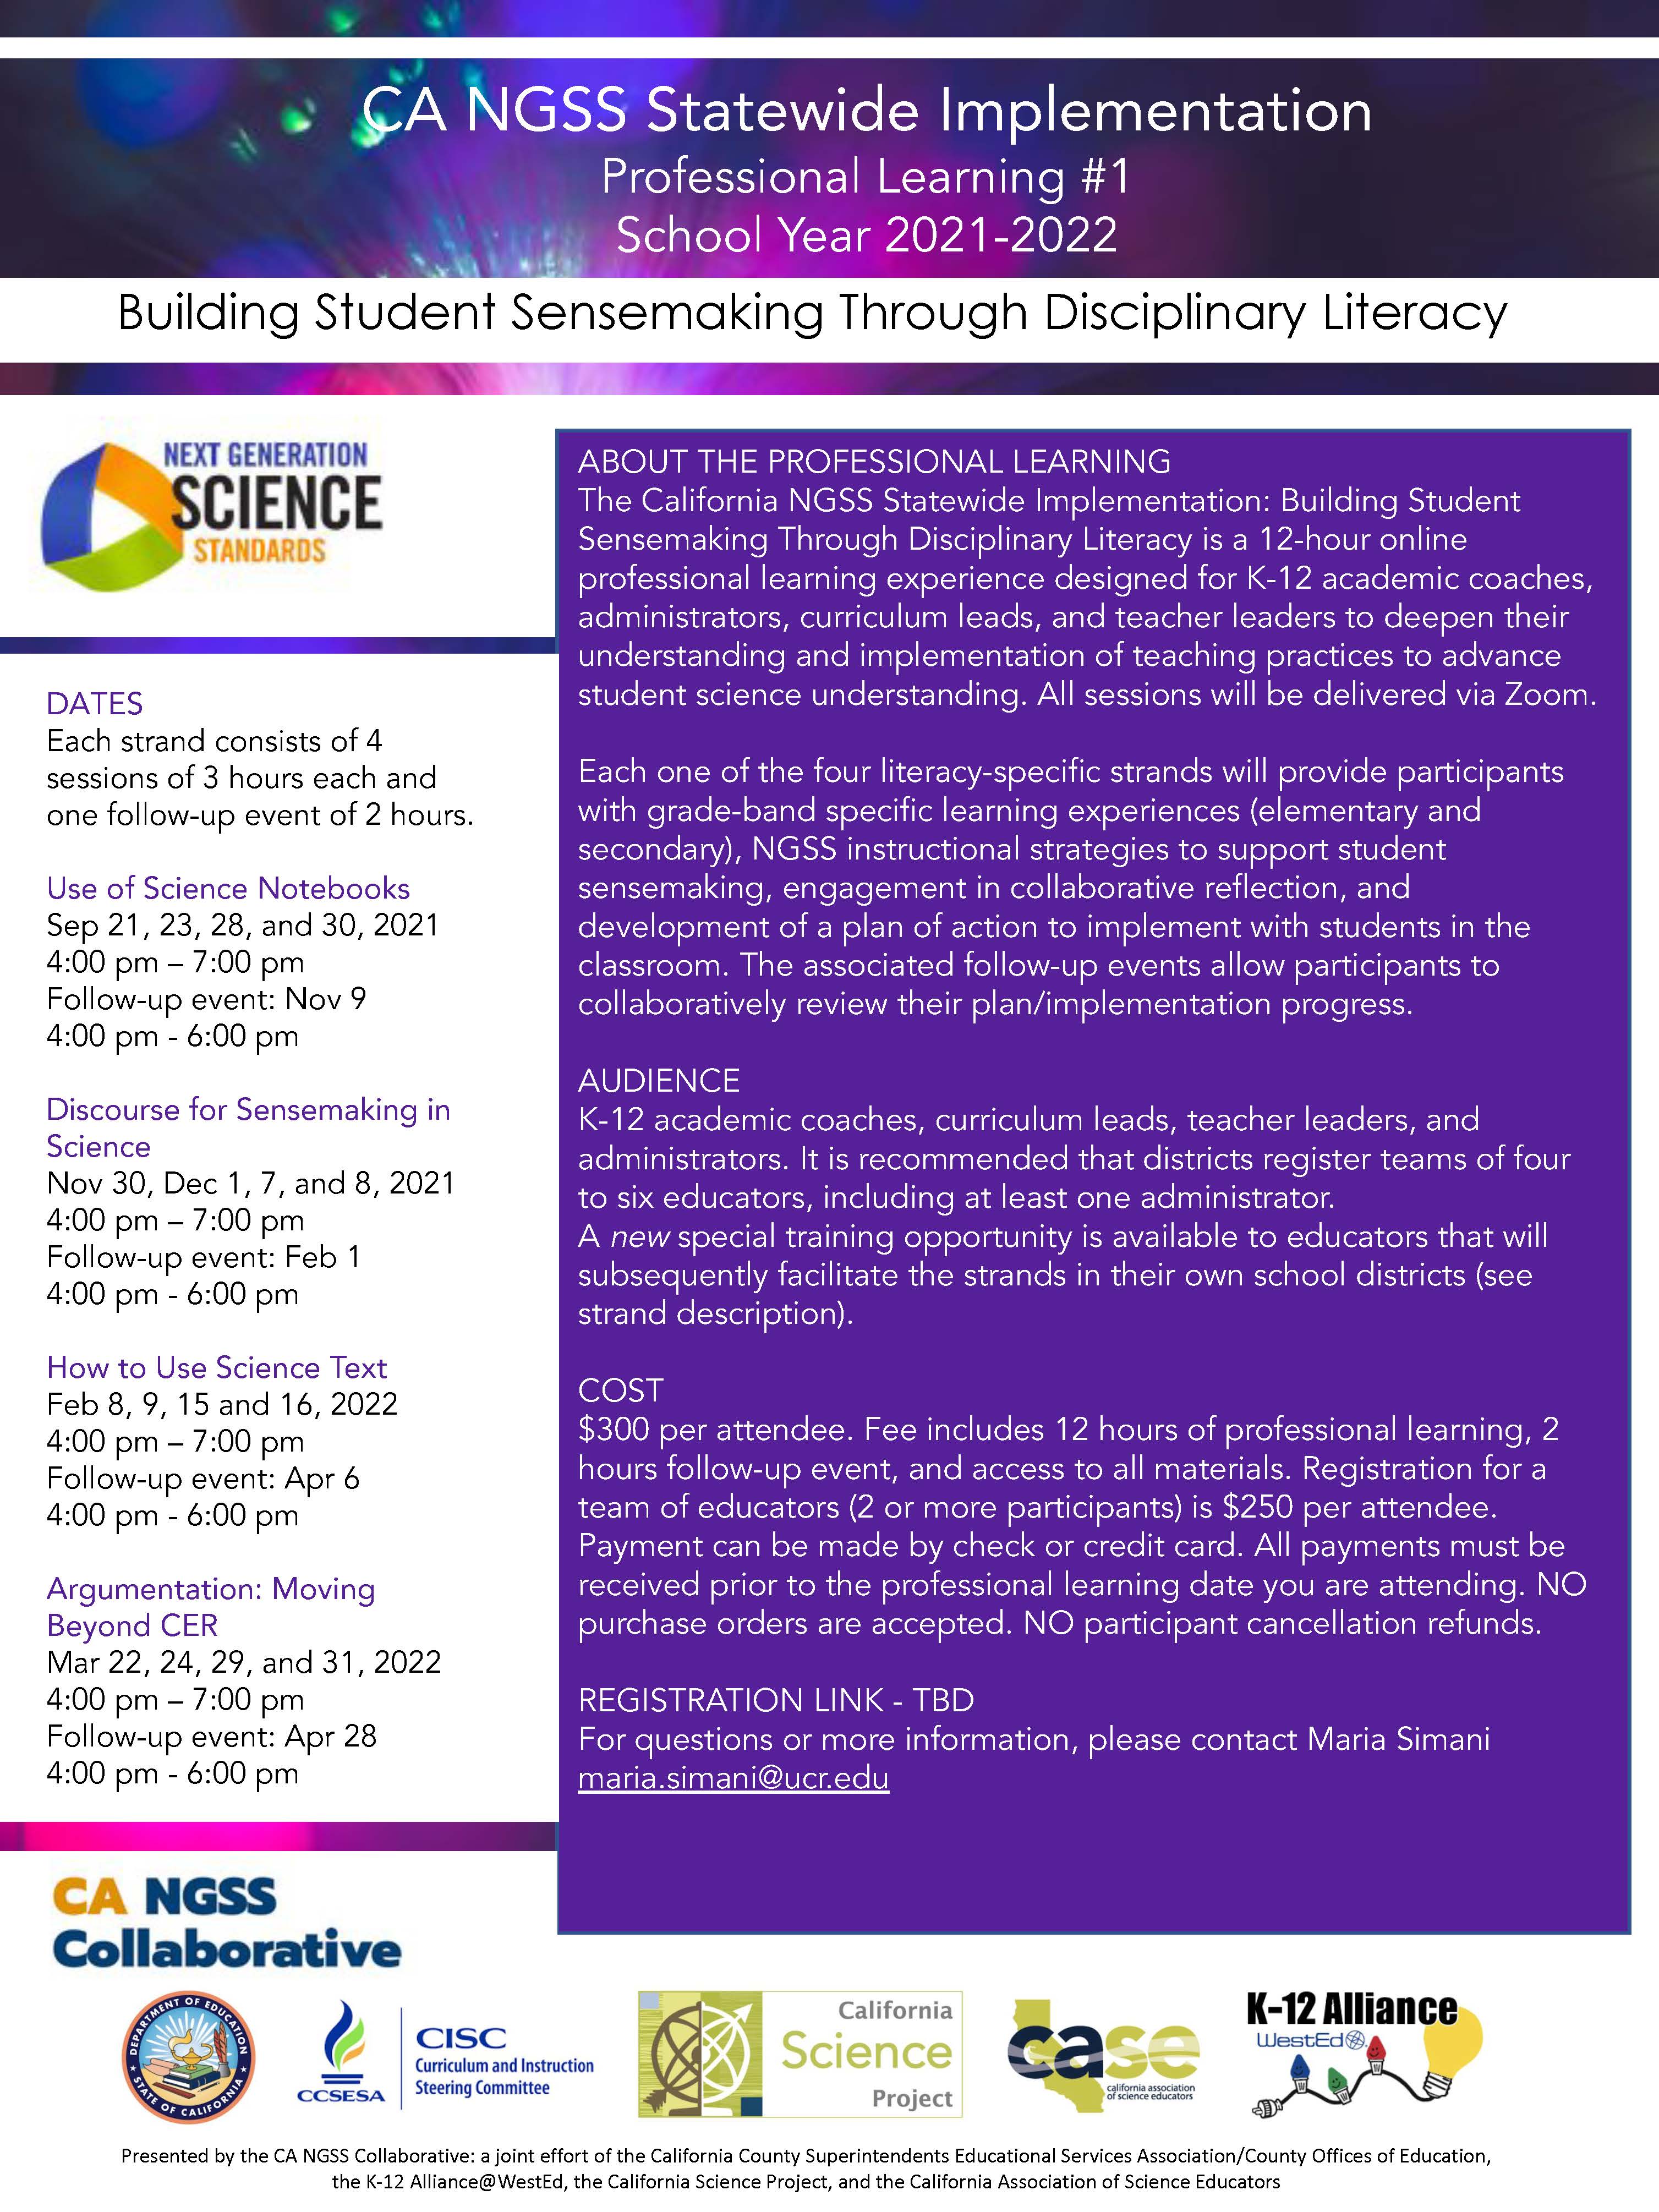 2021-2022 NGSS PL1 Flyer_Page_1.jpg